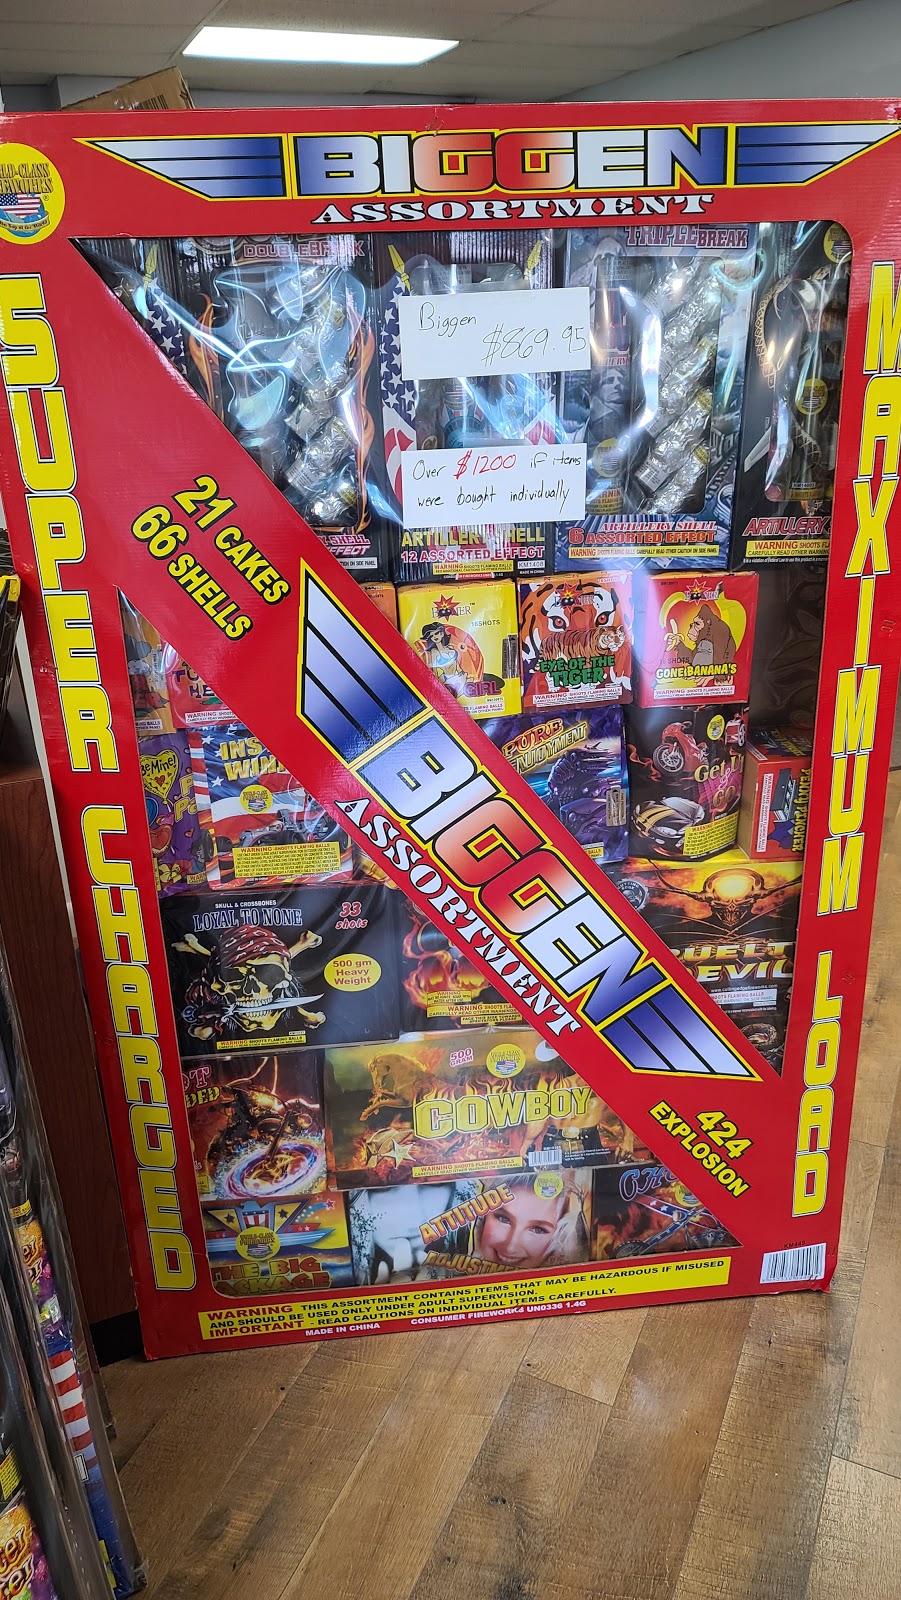 The Fireworks Superstore | 5641 PA-115, Blakeslee, PA 18610 | Phone: (570) 643-7625